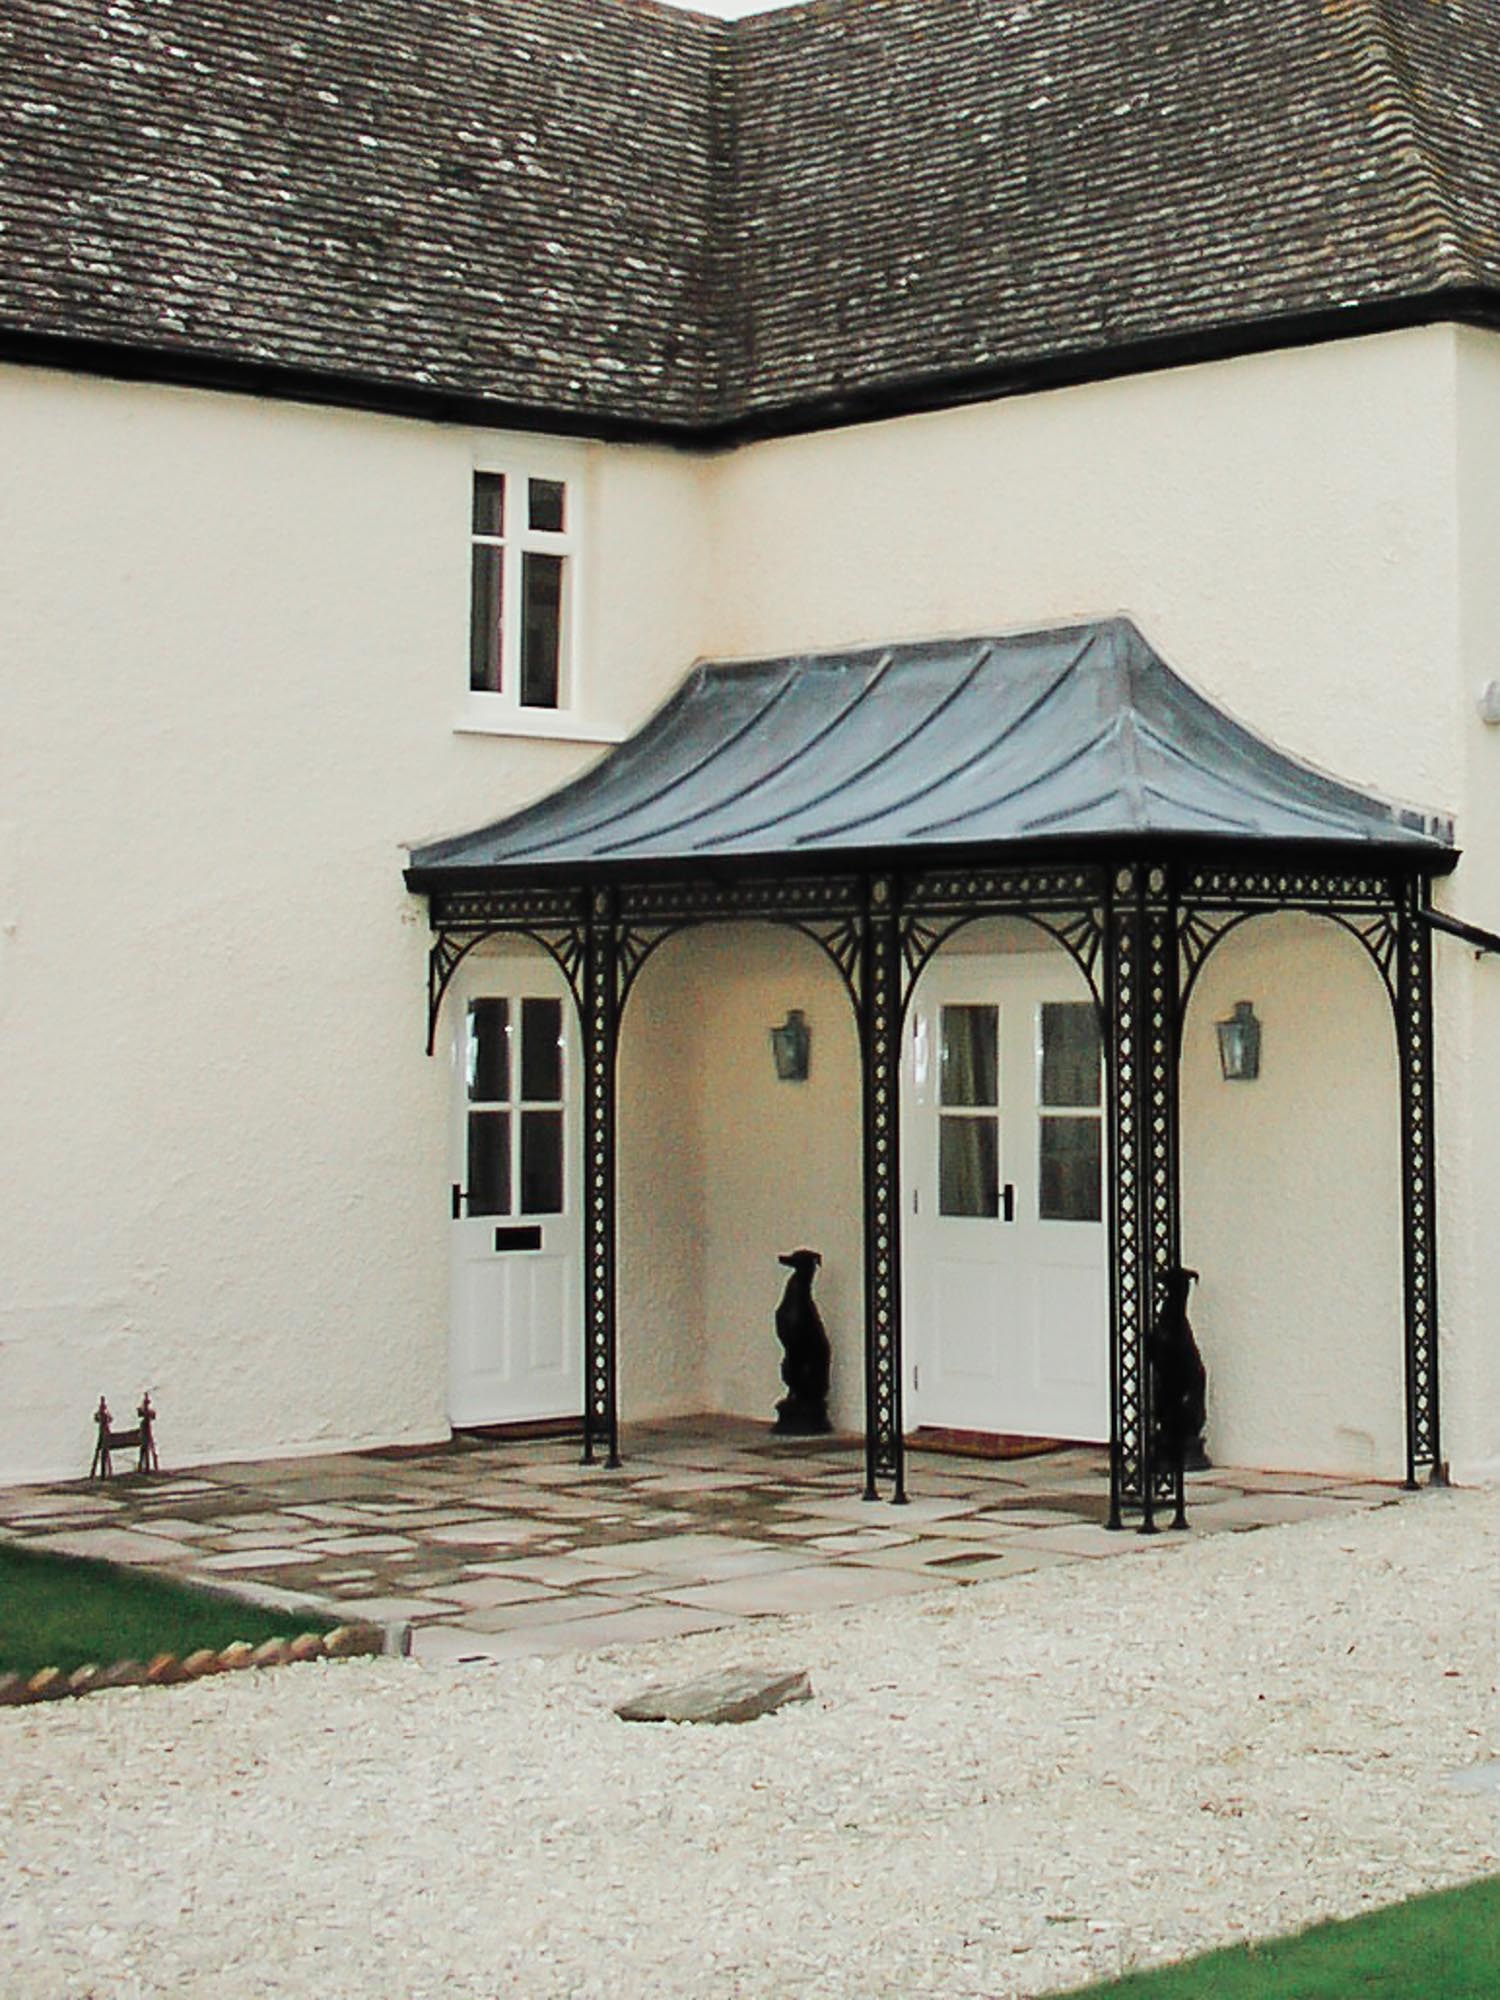 Wrought Iron Traditional Georgian Design Corner Porch Awning to cover a Front Door and French Doors with a Lead covered Roof Frame Canopy